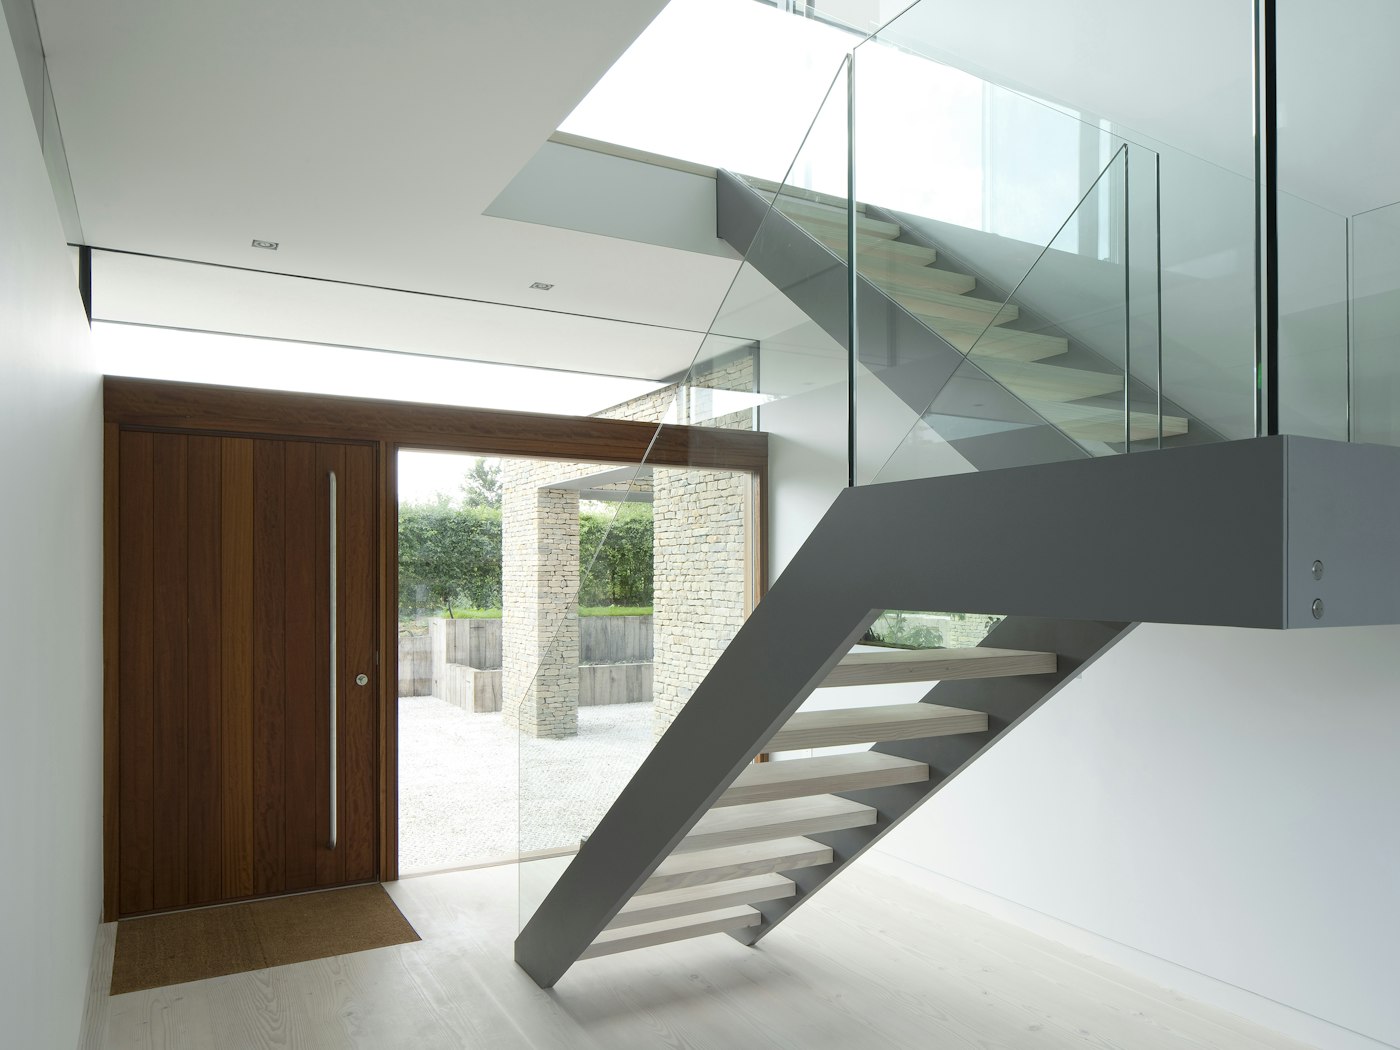 The minimalist interior is made even more impressive with the contrasting front door and staircase